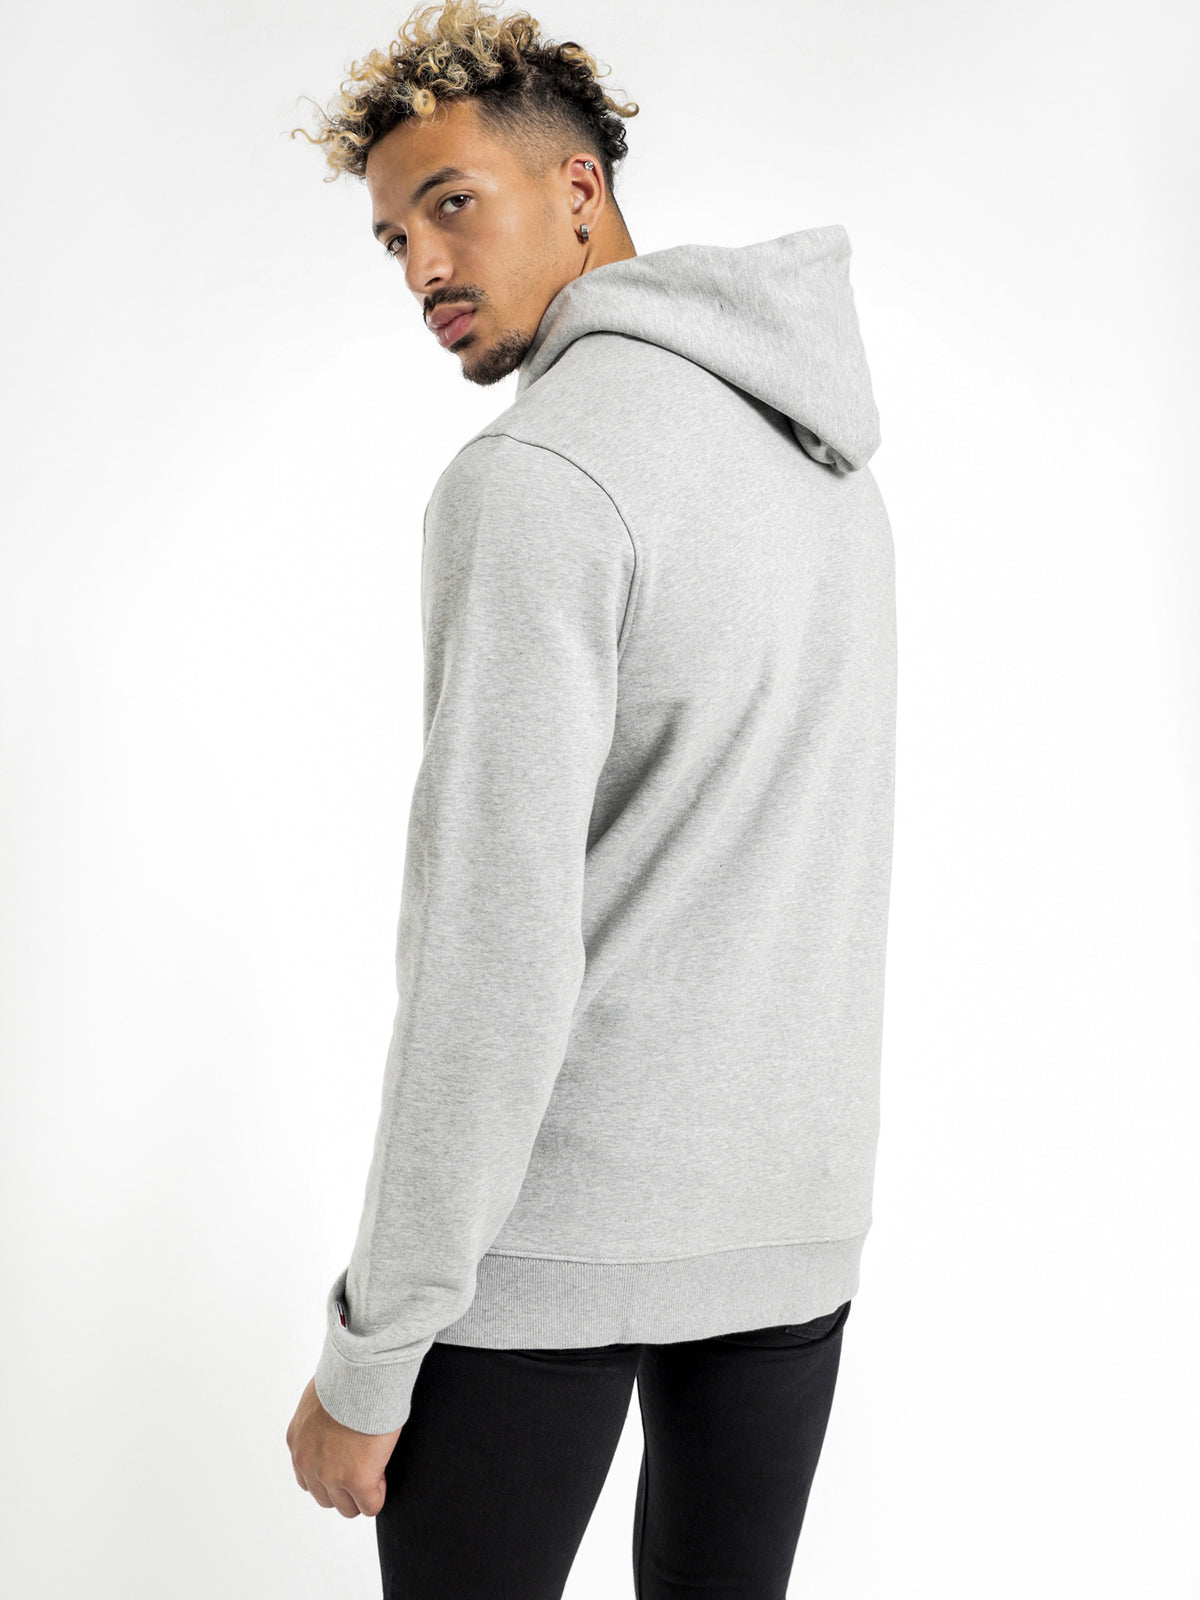 Embroidered Box Hoodie in Grey Marle